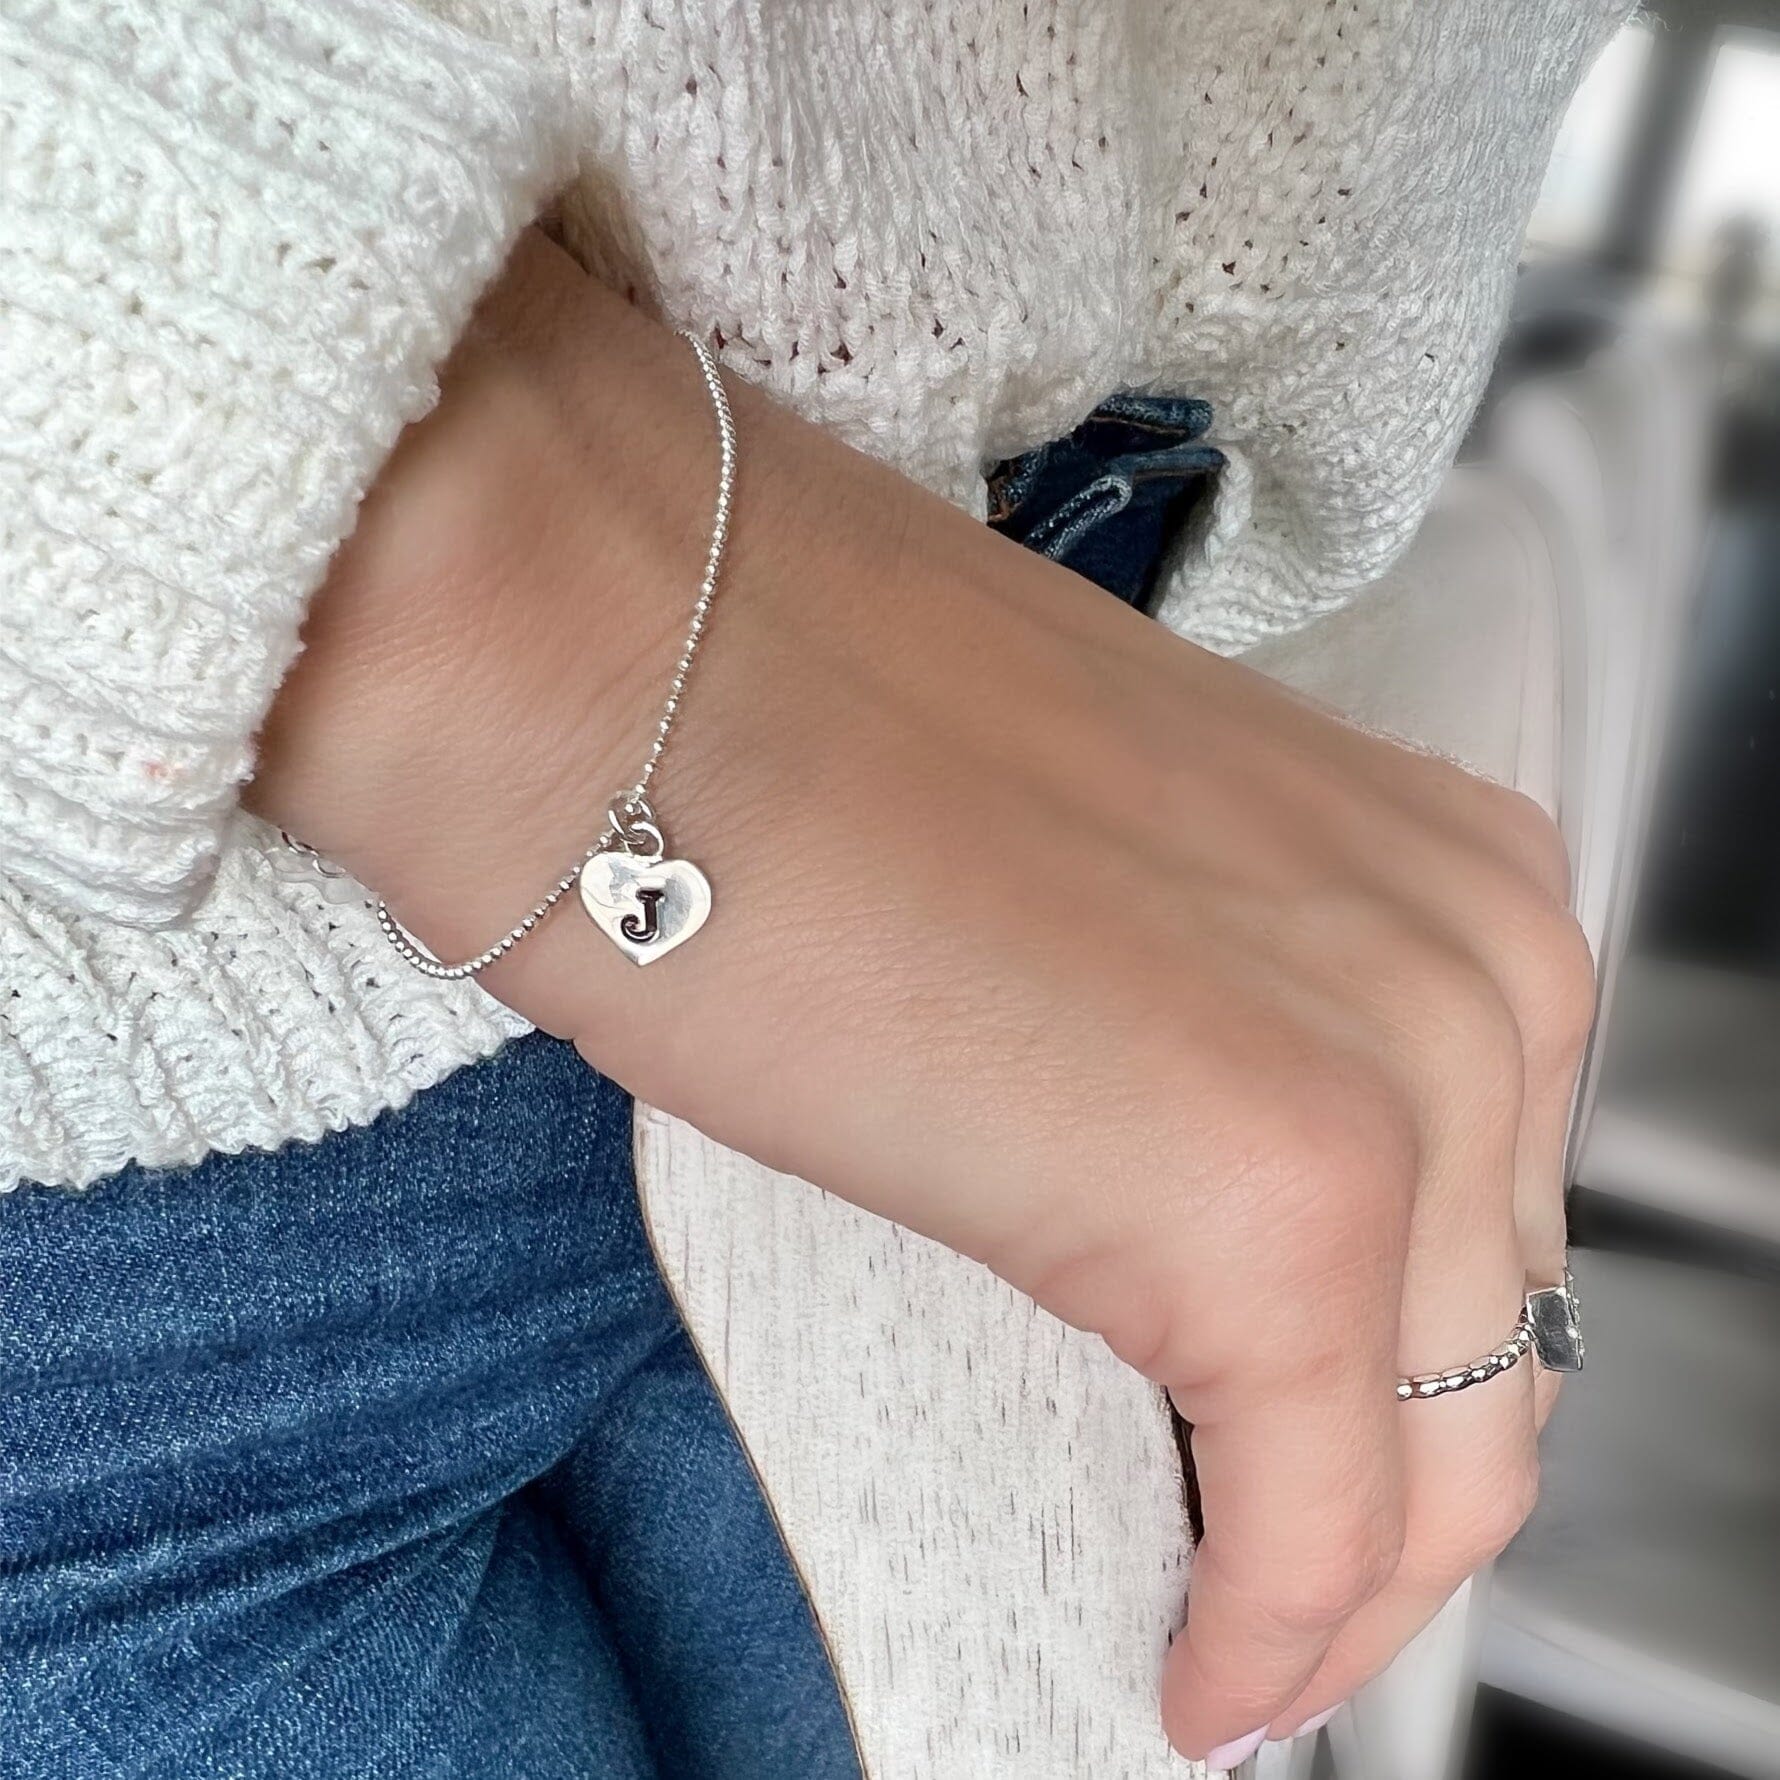 dainty jewelry paired together - Sweet Thing Bracelet & Emerald Cut Ring